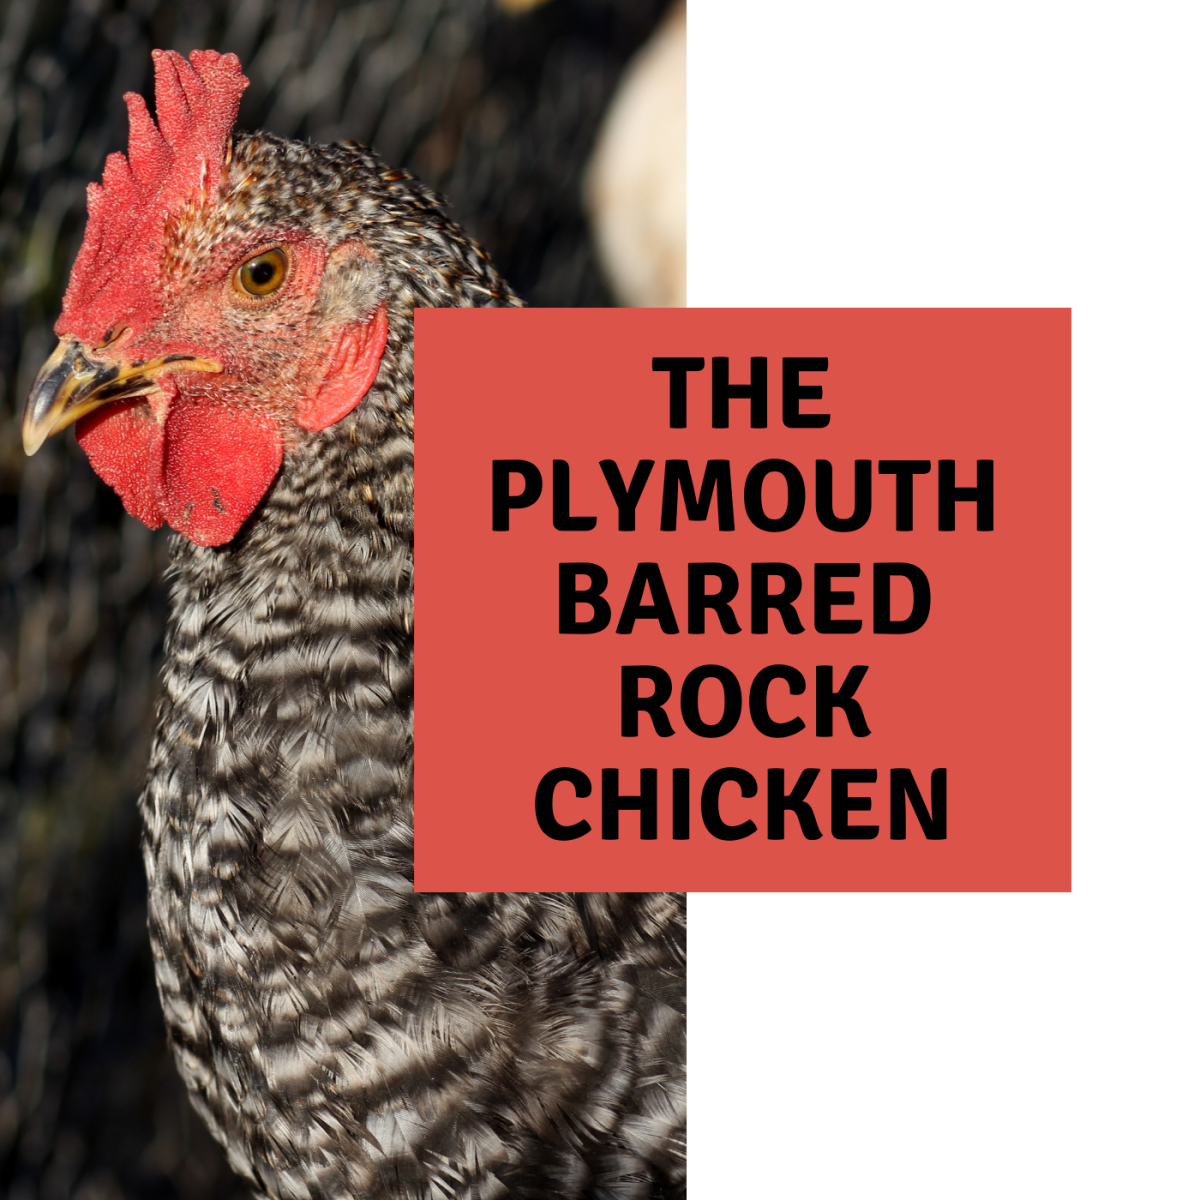 The Plymouth Barred Rock Chicken